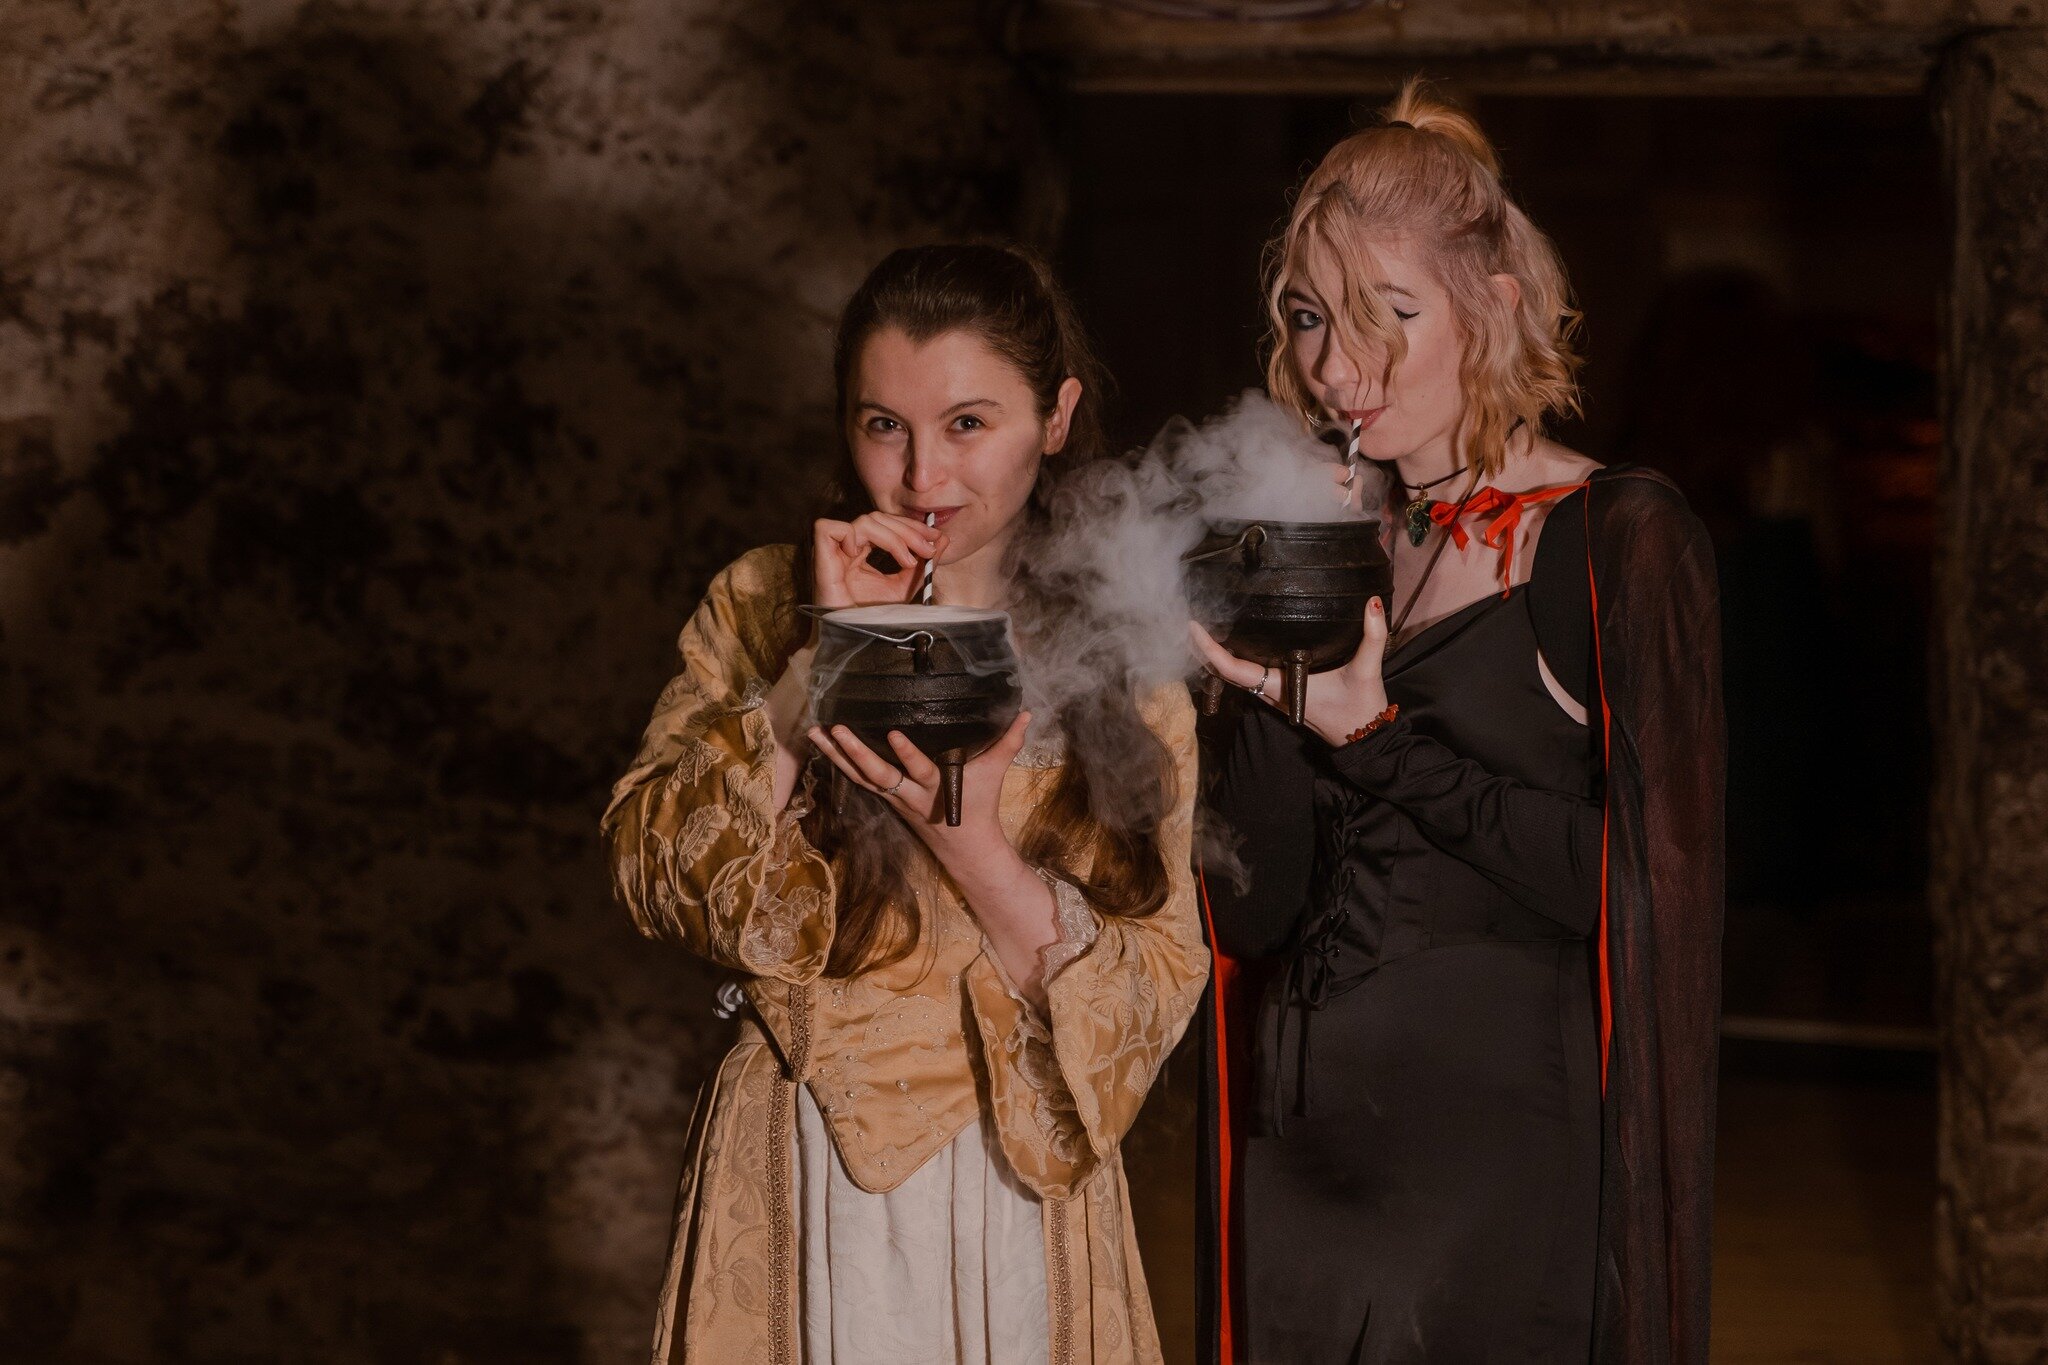 Discover the truth about Edinburgh's dark past with a tour at @marykingsclose and finish off with some magical cocktails at The Cauldron Edinburgh with our exclusive package! 🧙🏴󠁧󠁢󠁳󠁣󠁴󠁿 Book here: https://bookings.realmarykingsclose.com/book/gu